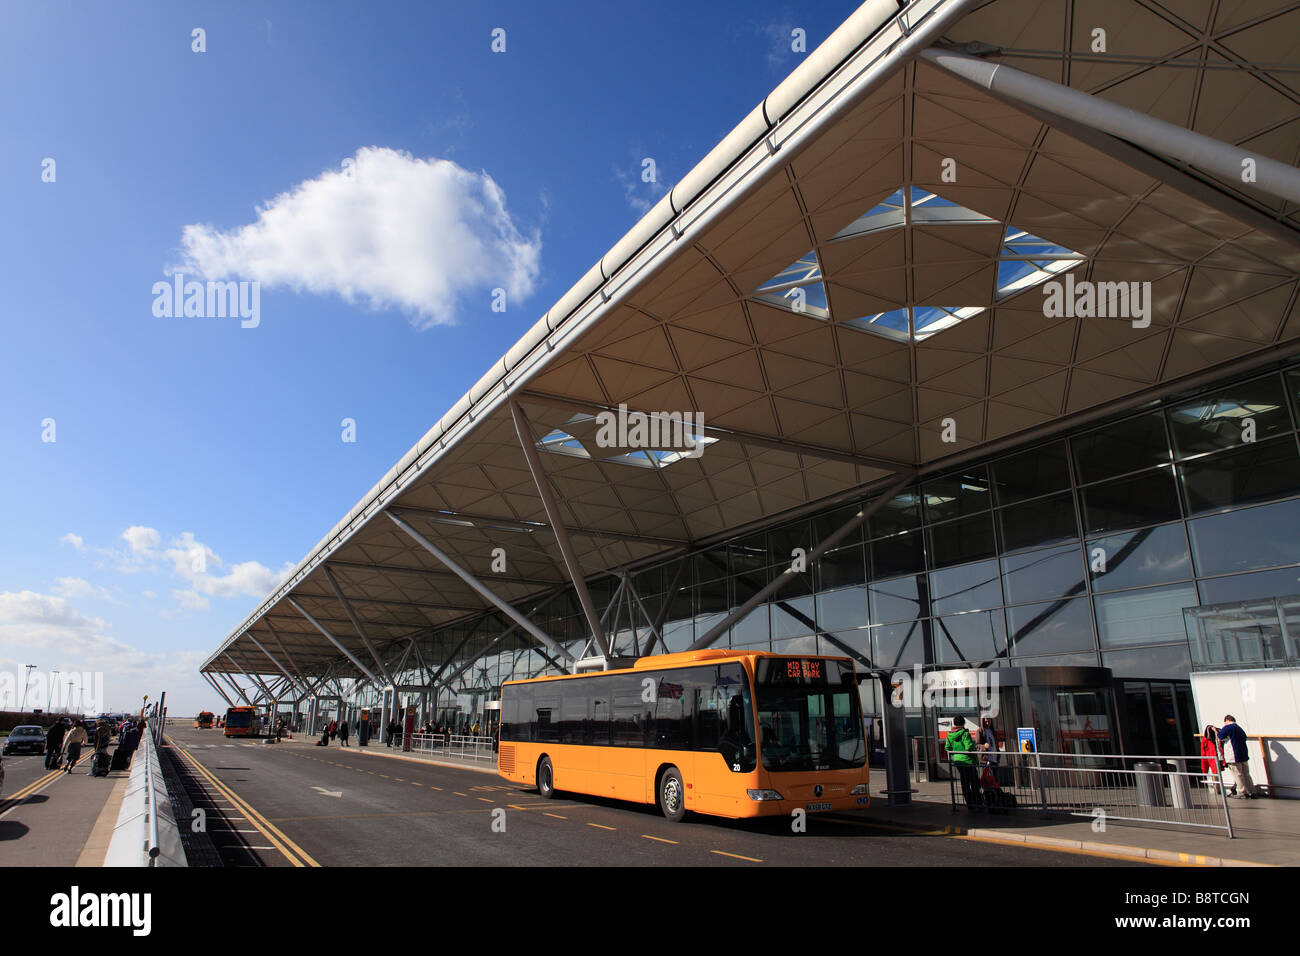 united kingdom essex stansted airport Stock Photo